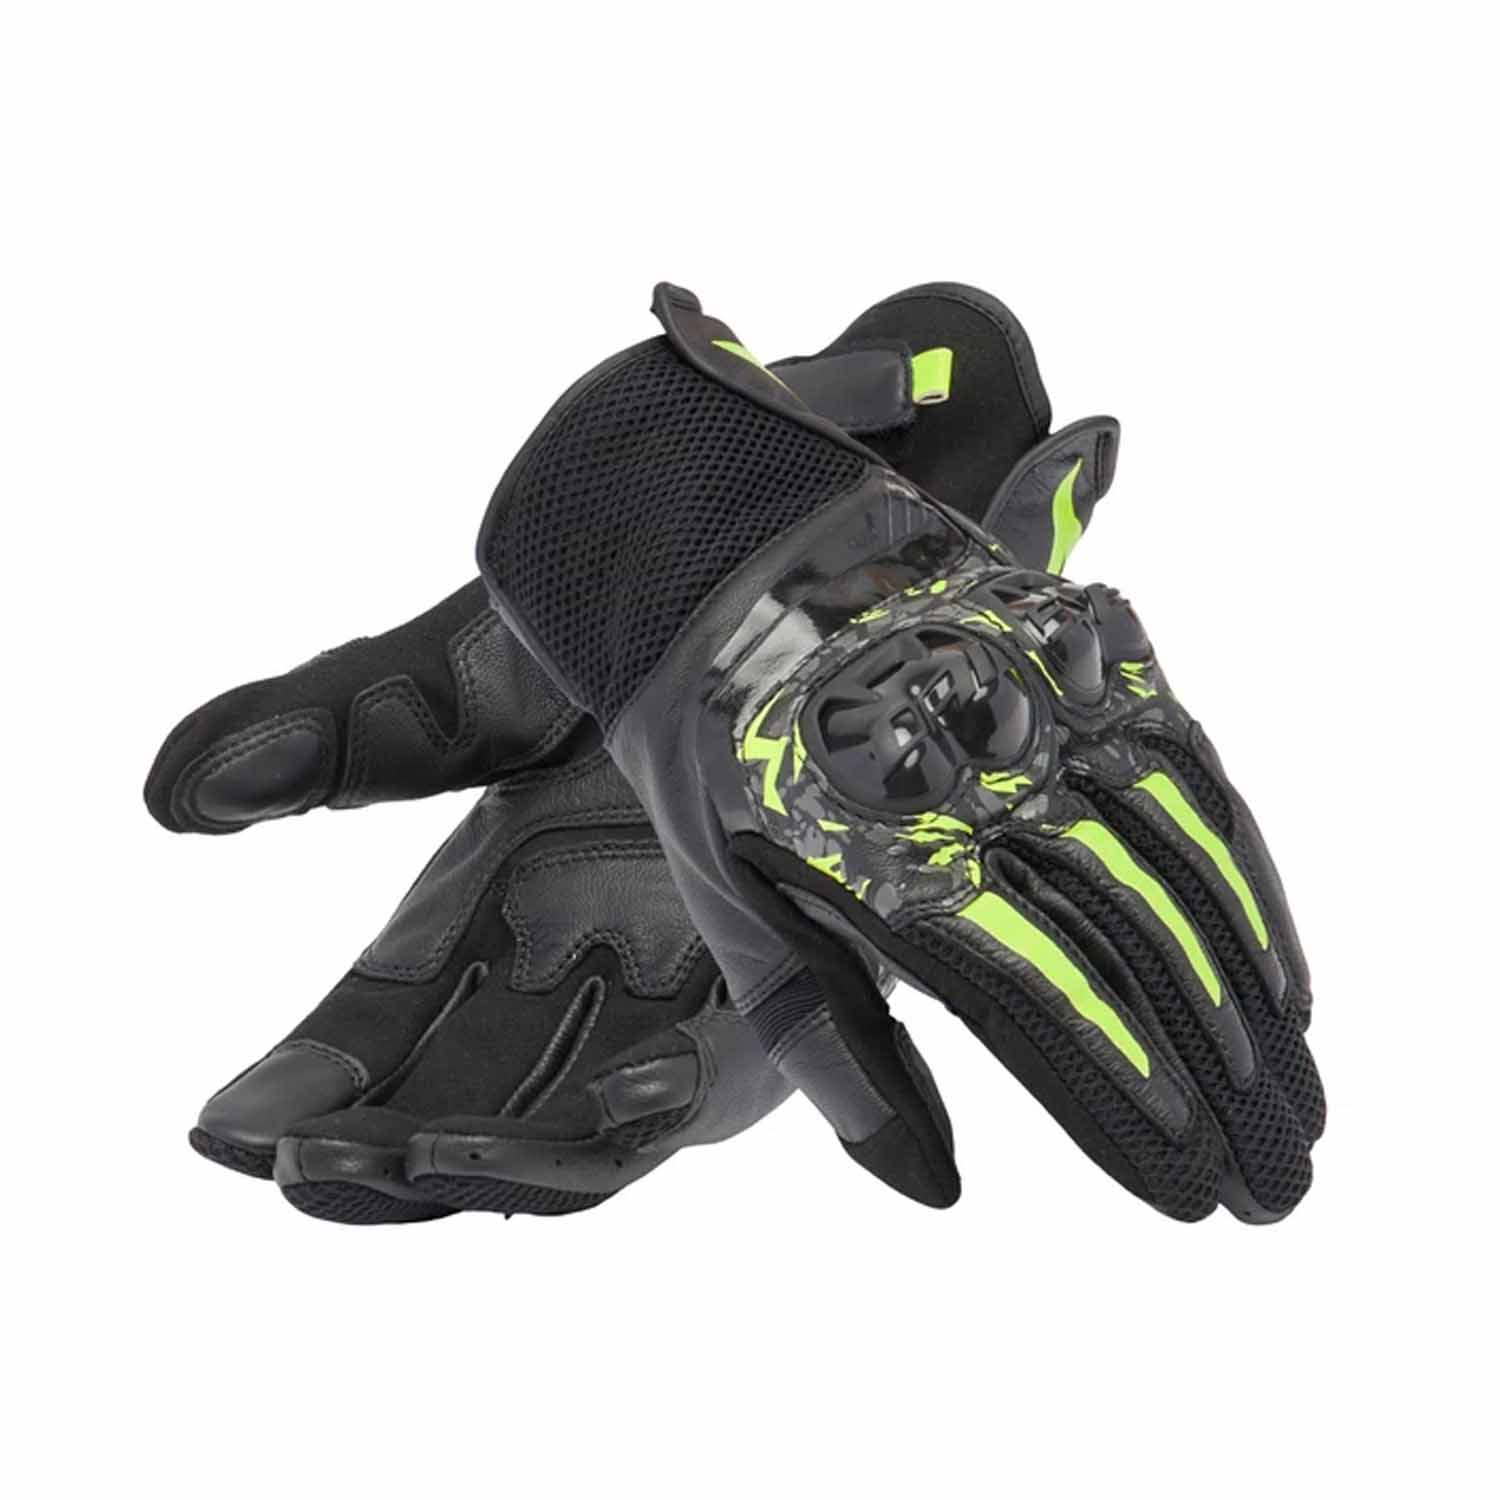 Image of Dainese MIG 3 Gloves Black Anthracite Yellow Fluo Talla XL